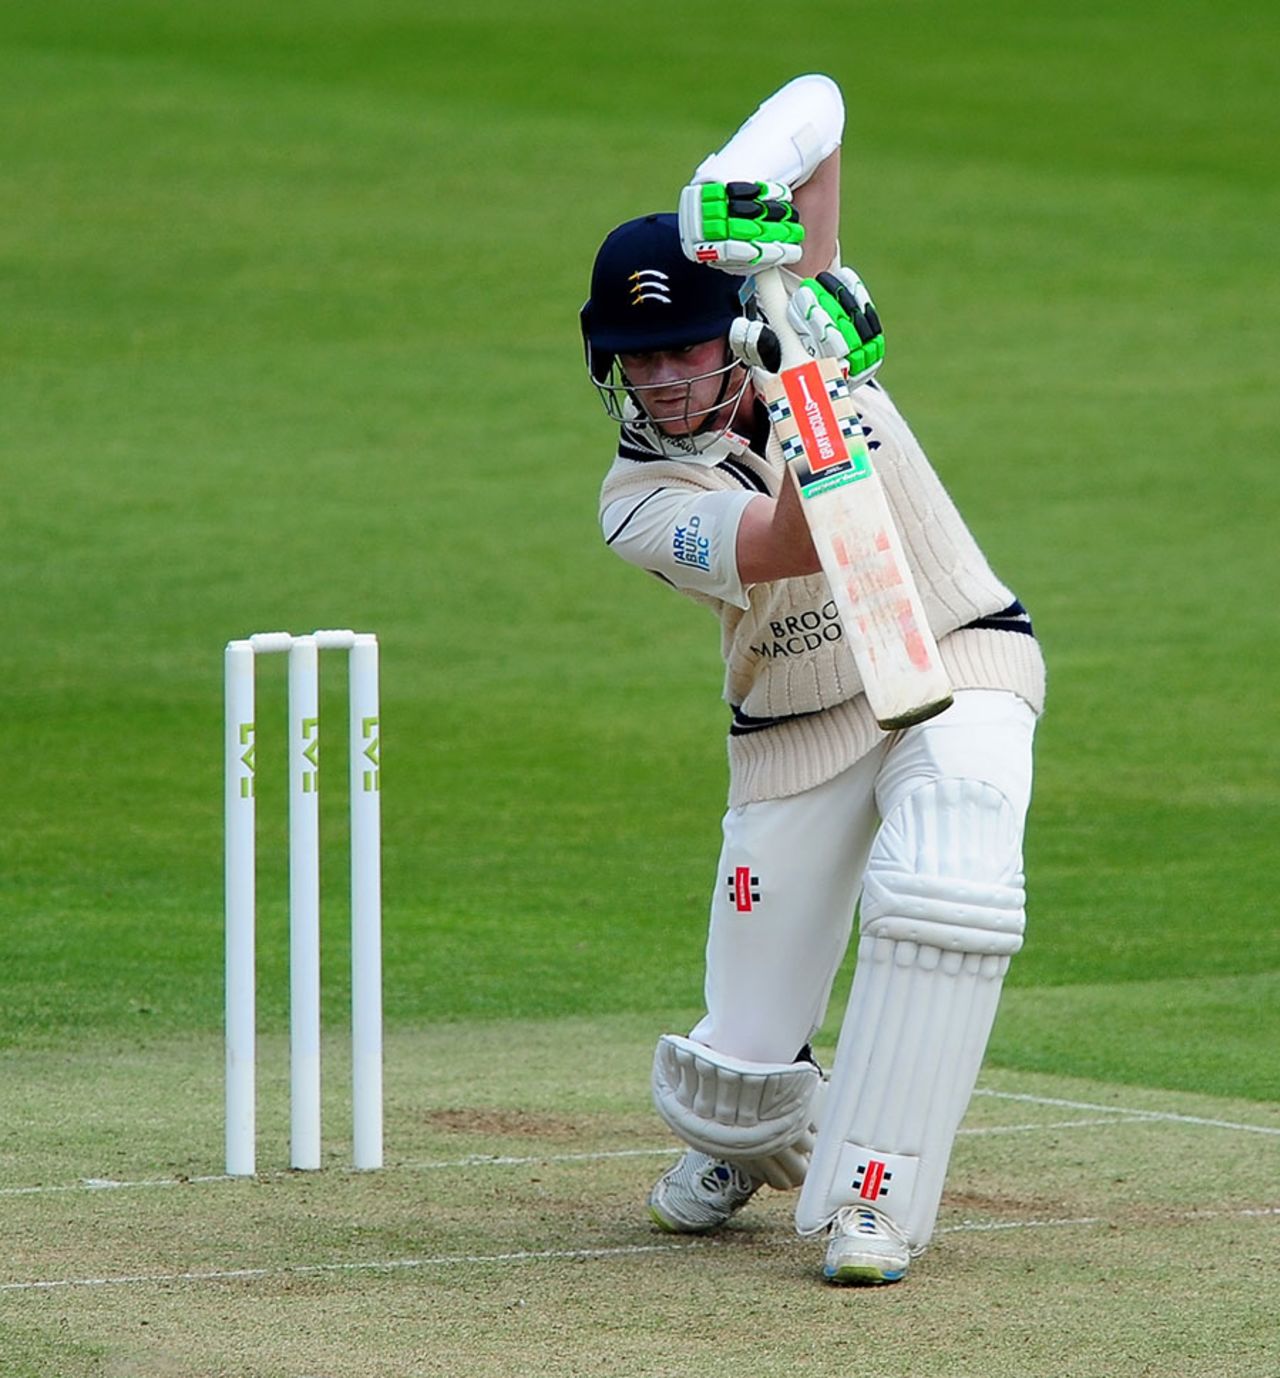 Sam Robson drives on his way to a hundred, Middlesex v Durham, County Championship Division One, Lord's, 1st day, May 2, 2015